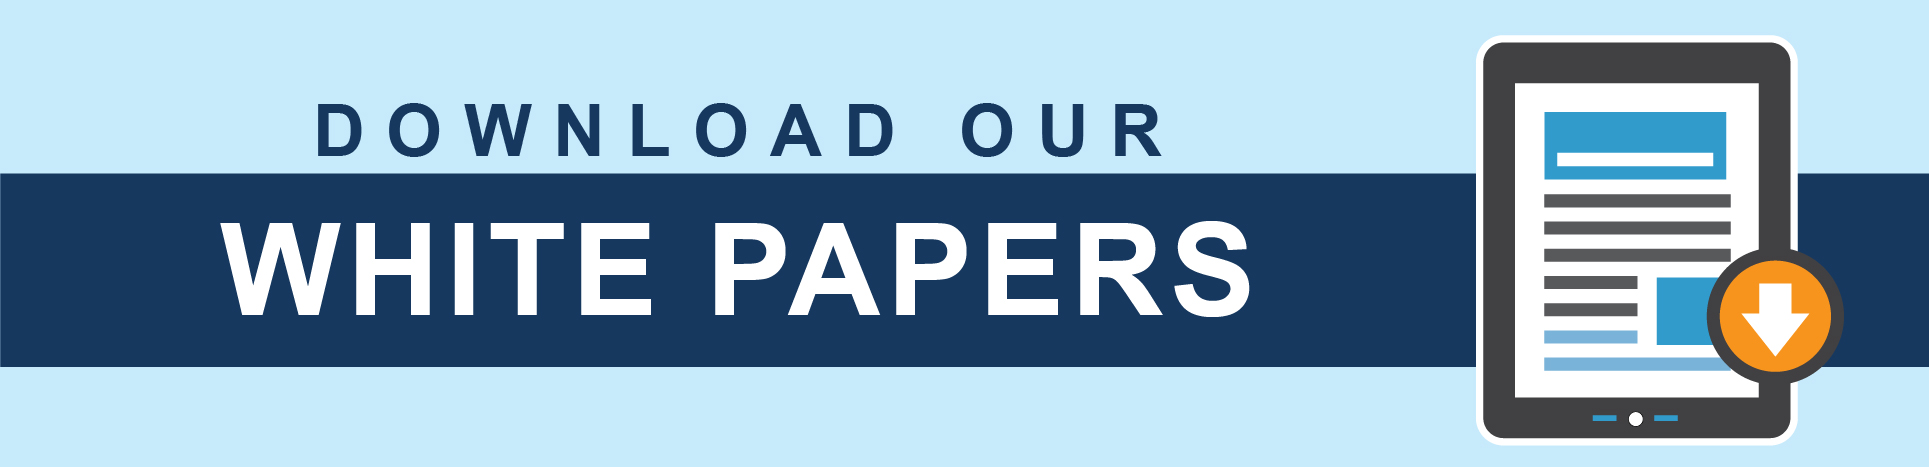 Download_White Papers